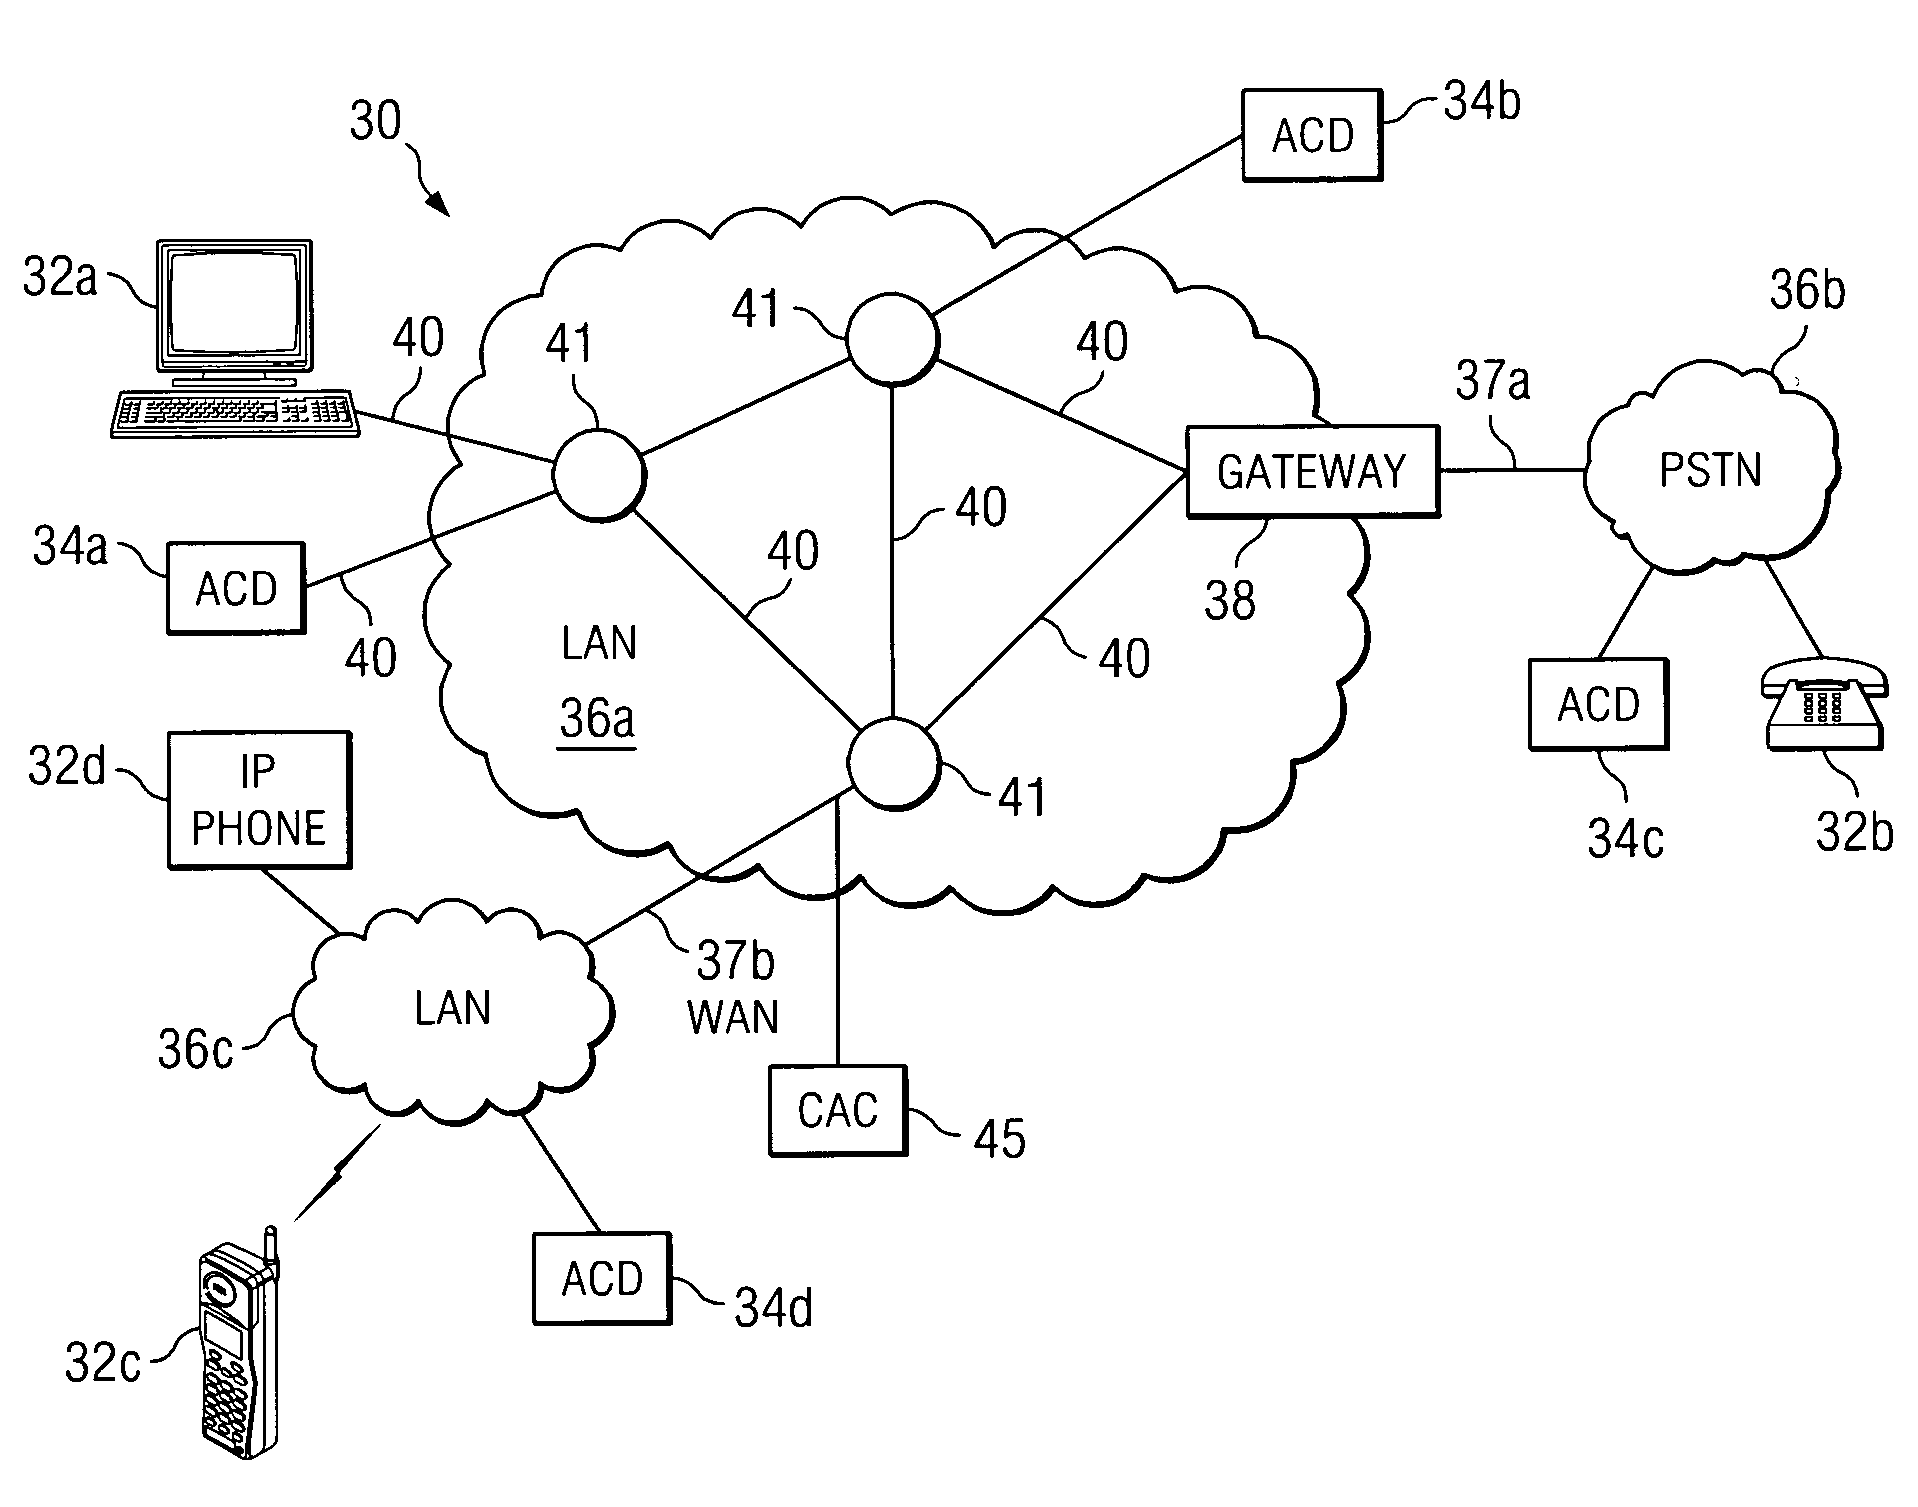 Method and system for providing agent training